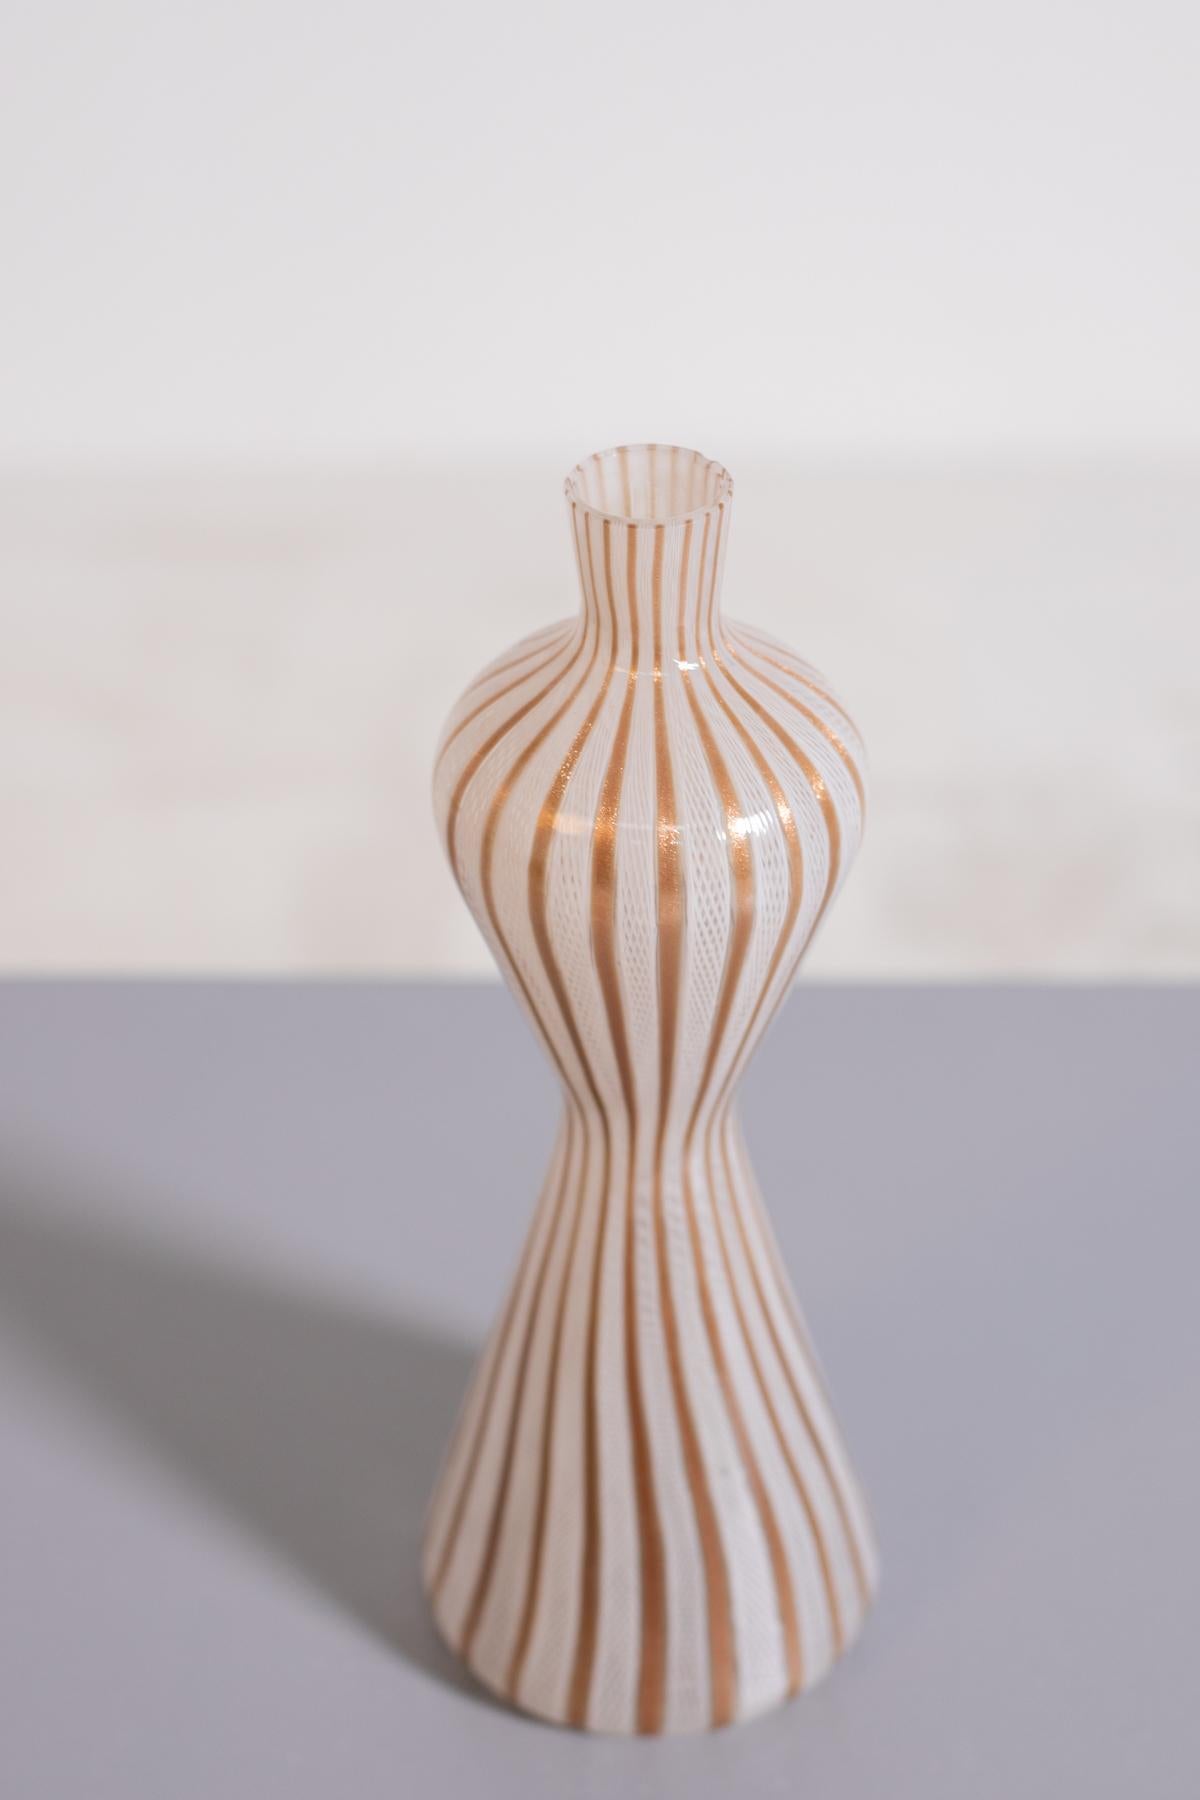 Glass with gold coloured ribbon with vertical lines inside transparent glass reticello technique, work of the master Venini. The elegant tall, hourglass-shaped vase has a narrow neck with a flat, rounded top. Signed, 1950s

Dimensions:
Height 30